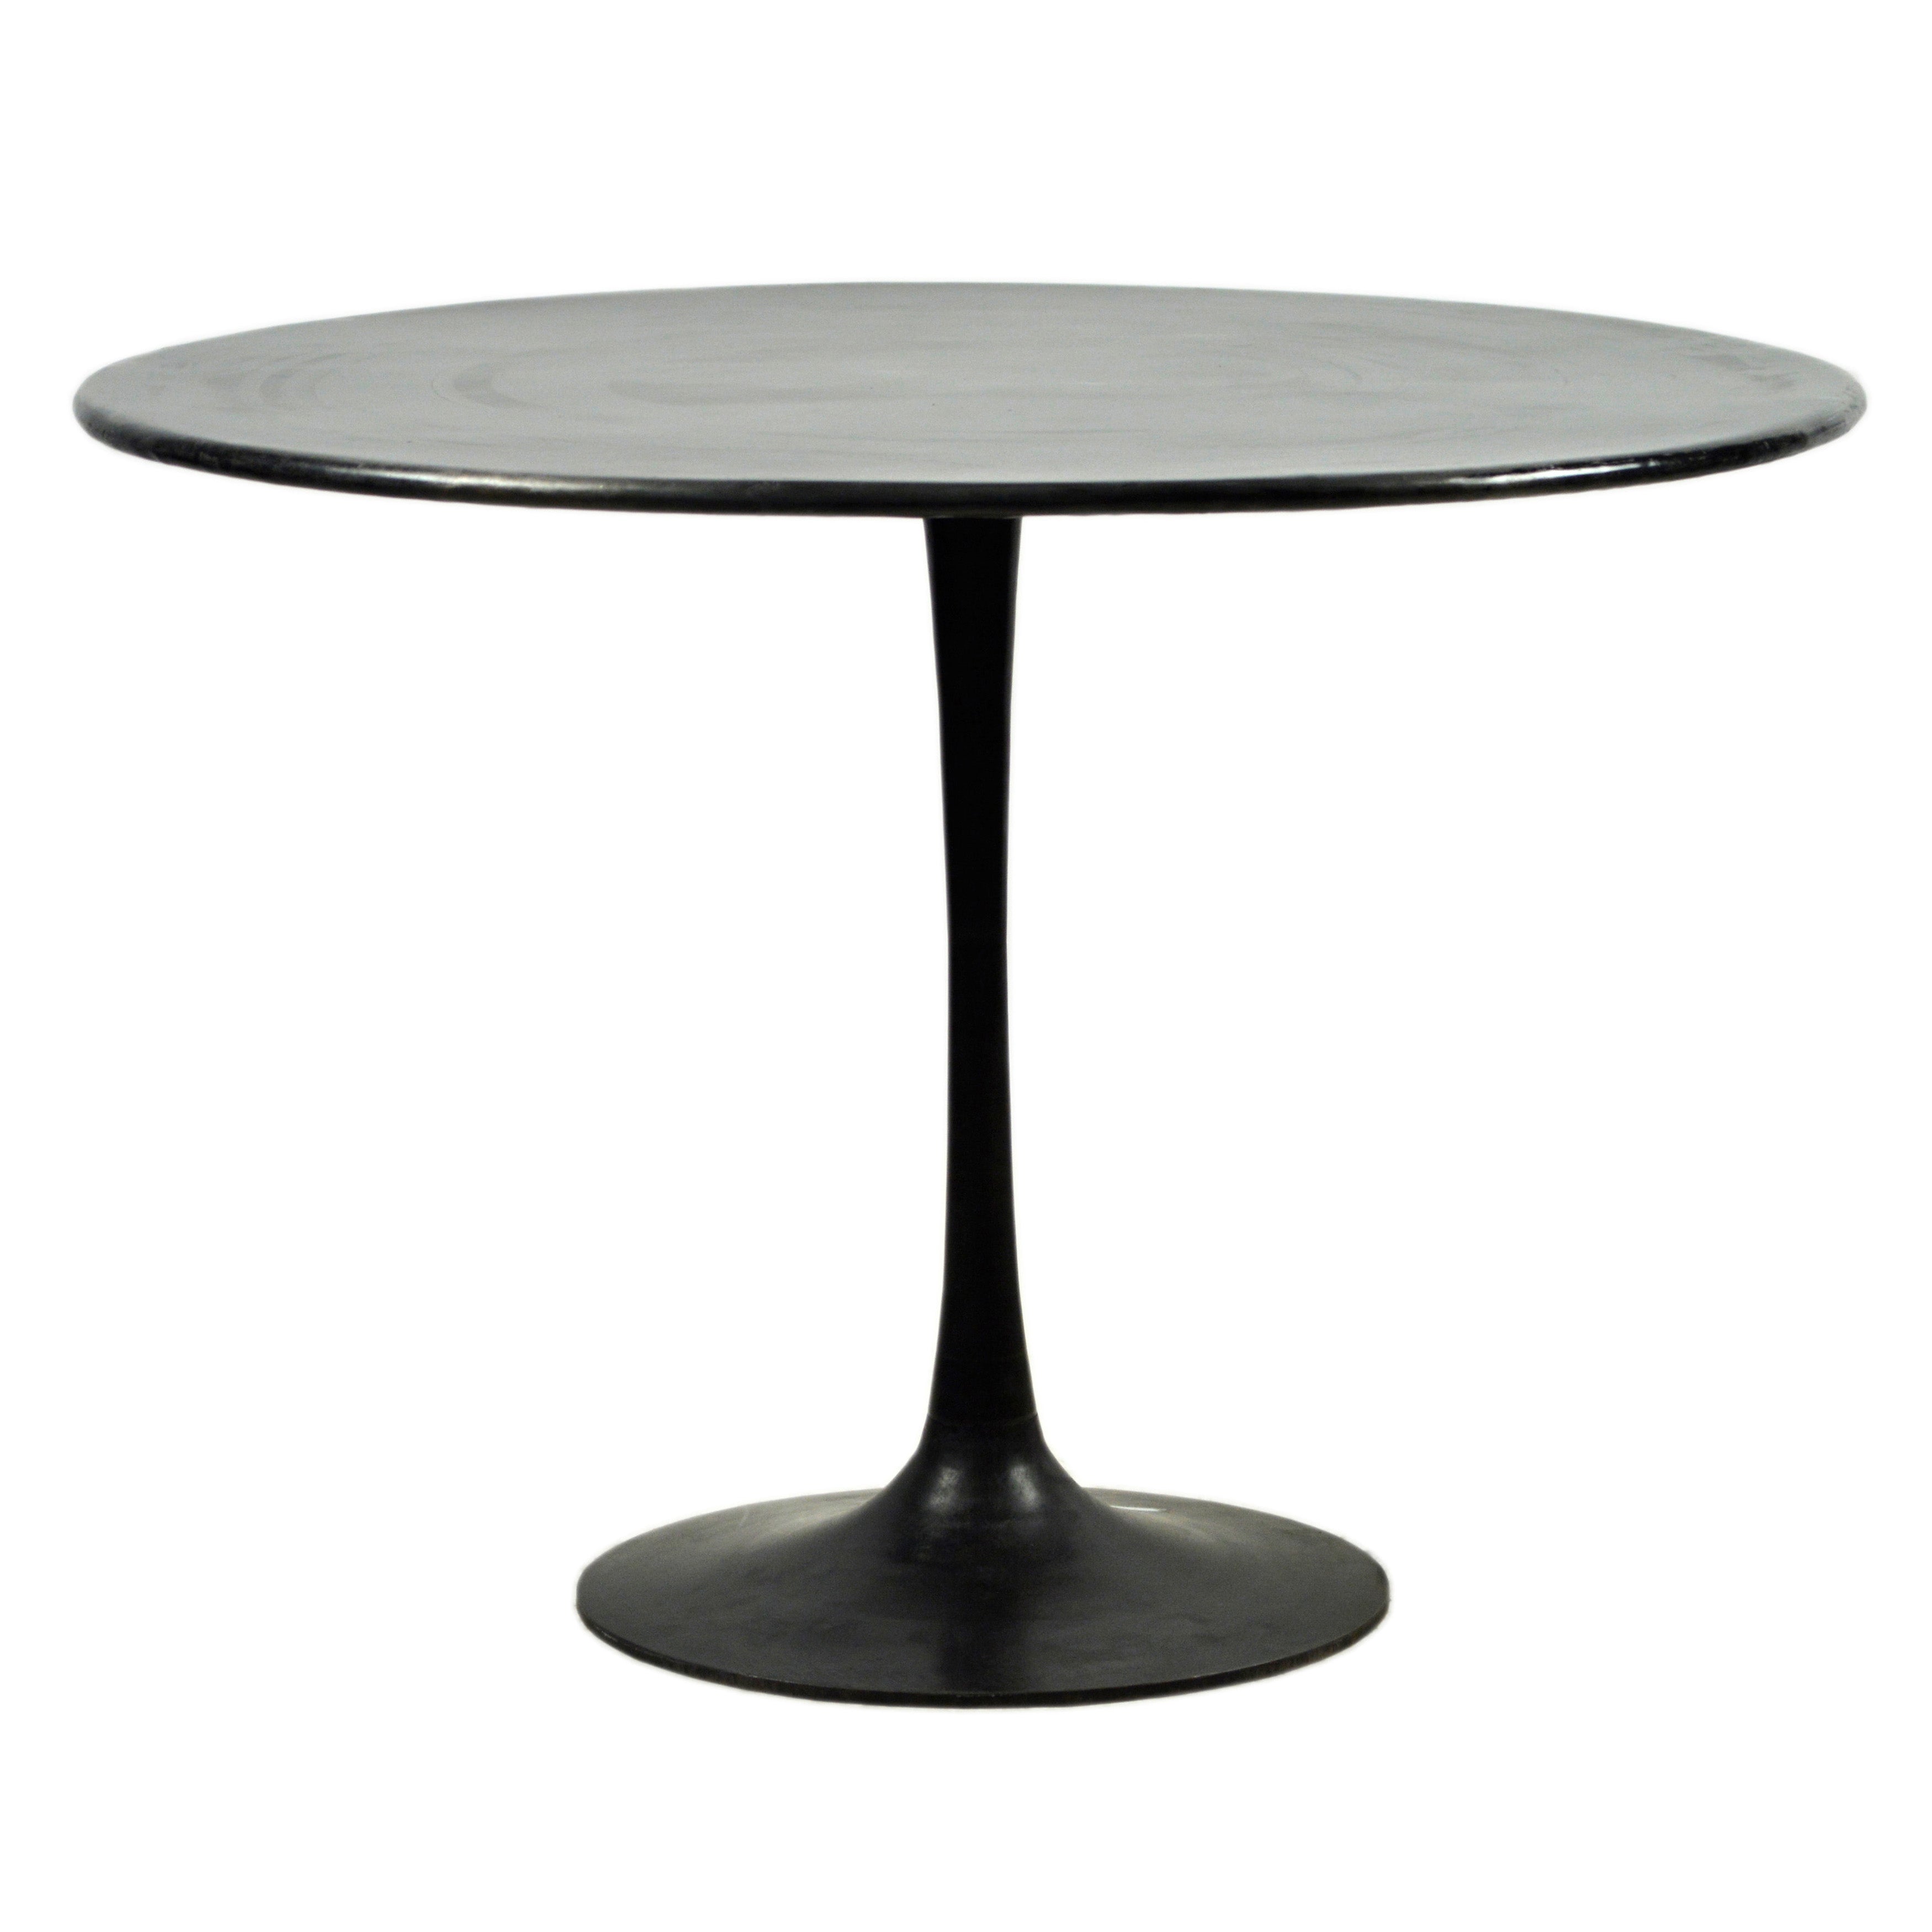 Enhance your home decor with the perfect blend of modern and industrial styles embodied in this timeless tulip table. Designed to showcase your favorite homemade meals, it features a captivating flared pedestal base crafted from iron, adorned with a deep black antique finish that adds a bold and modernistic edge to your space. Amethyst Home provides interior design, new home construction design consulting, vintage area rugs, and lighting in the Winter Garden metro area.